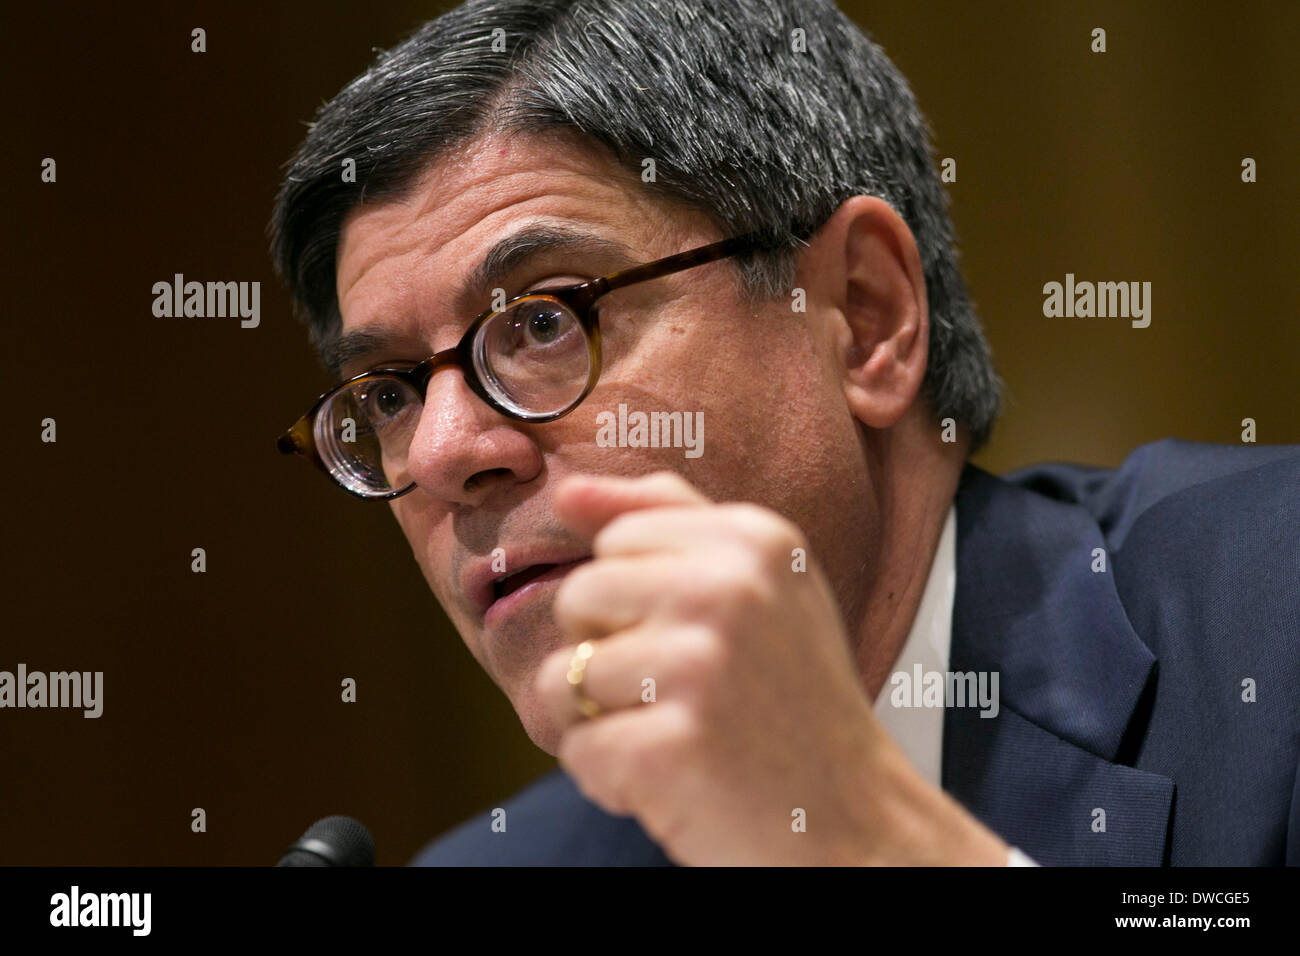 Washington DC, USA. 5th March 2014. Treasury Secretary Jack Lew testifies before the Senate Finance Committee during a hearing on the President's FY2015 Budget in Washington, D.C. on March 5, 2014. Credit:  Kristoffer Tripplaar/Alamy Live News Stock Photo